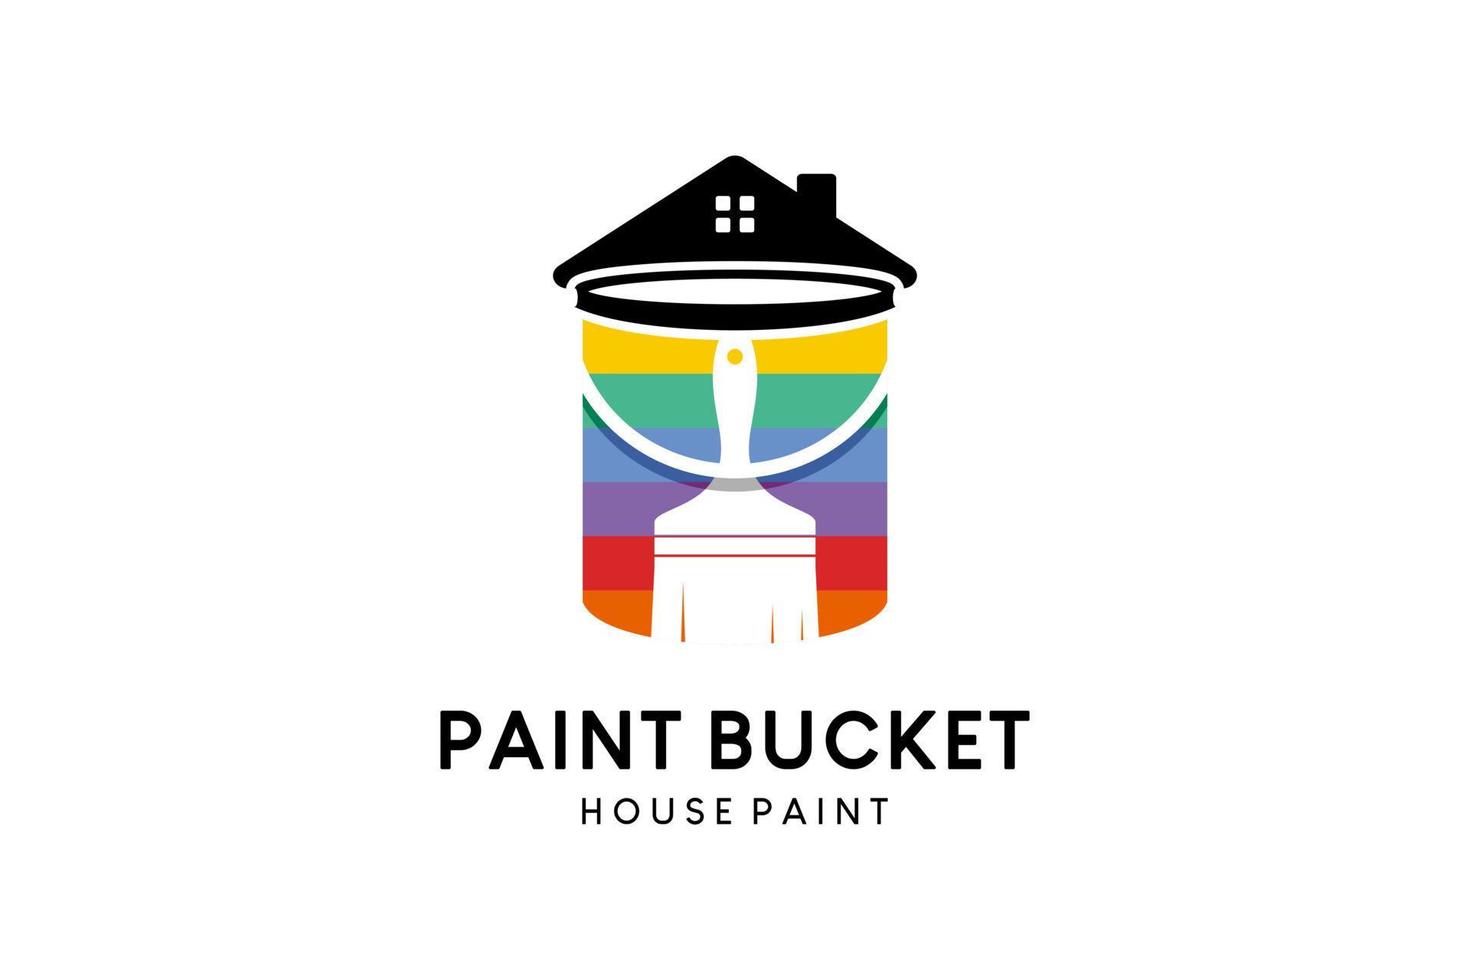 Paint bucket vector illustration logo design, a combination of paint bucket, house icon and brush